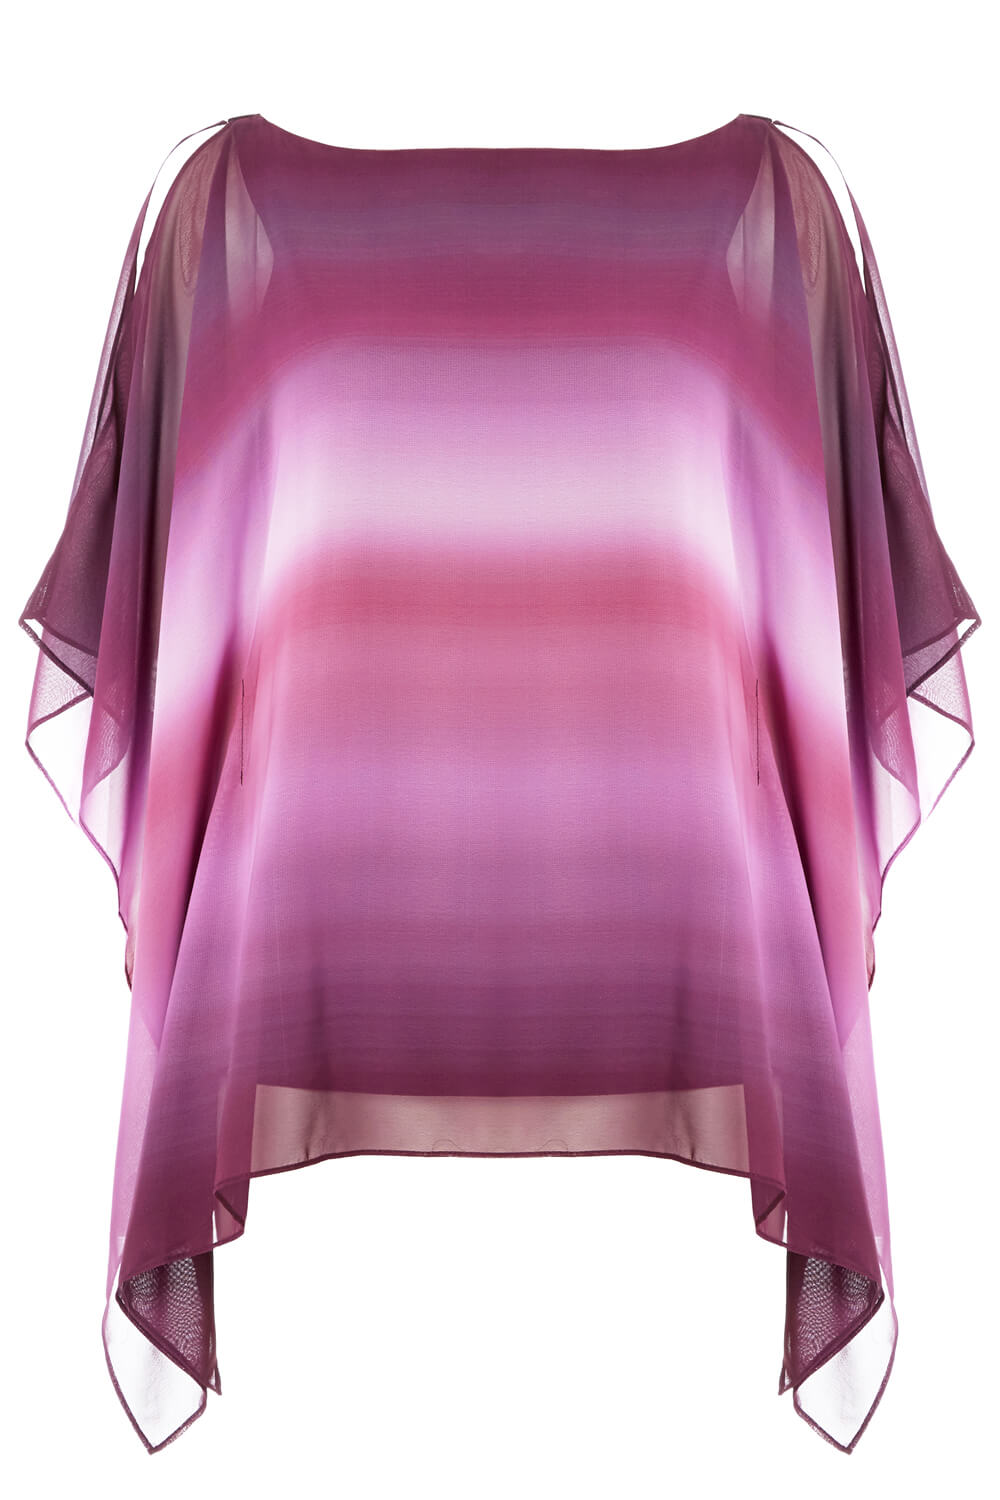 Purple Ombre Cold Shoulder Overlay Top, Image 5 of 5